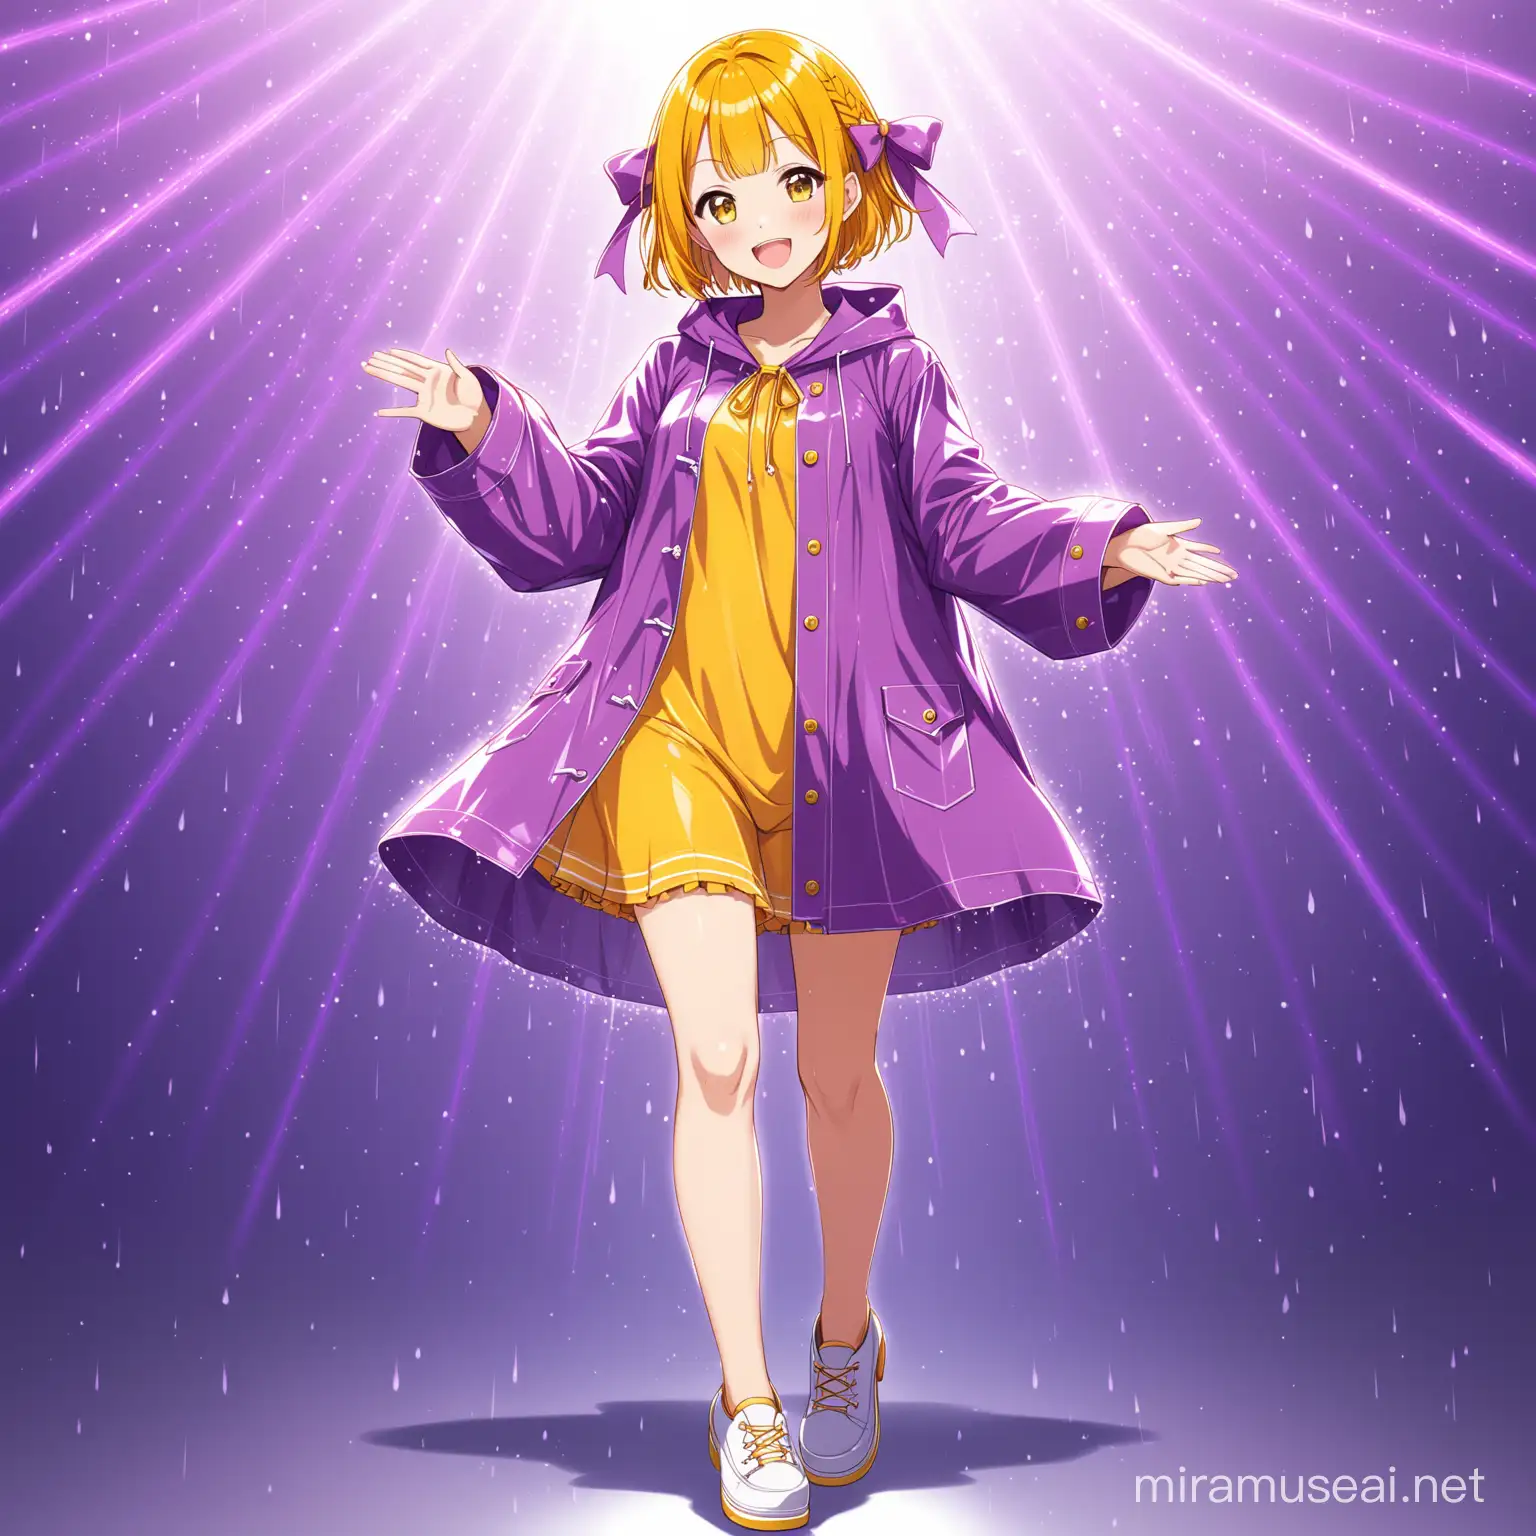 Cheerful Anime Girl in Marigold Hair and Purple Raincoat Idolizes in Solo Pose